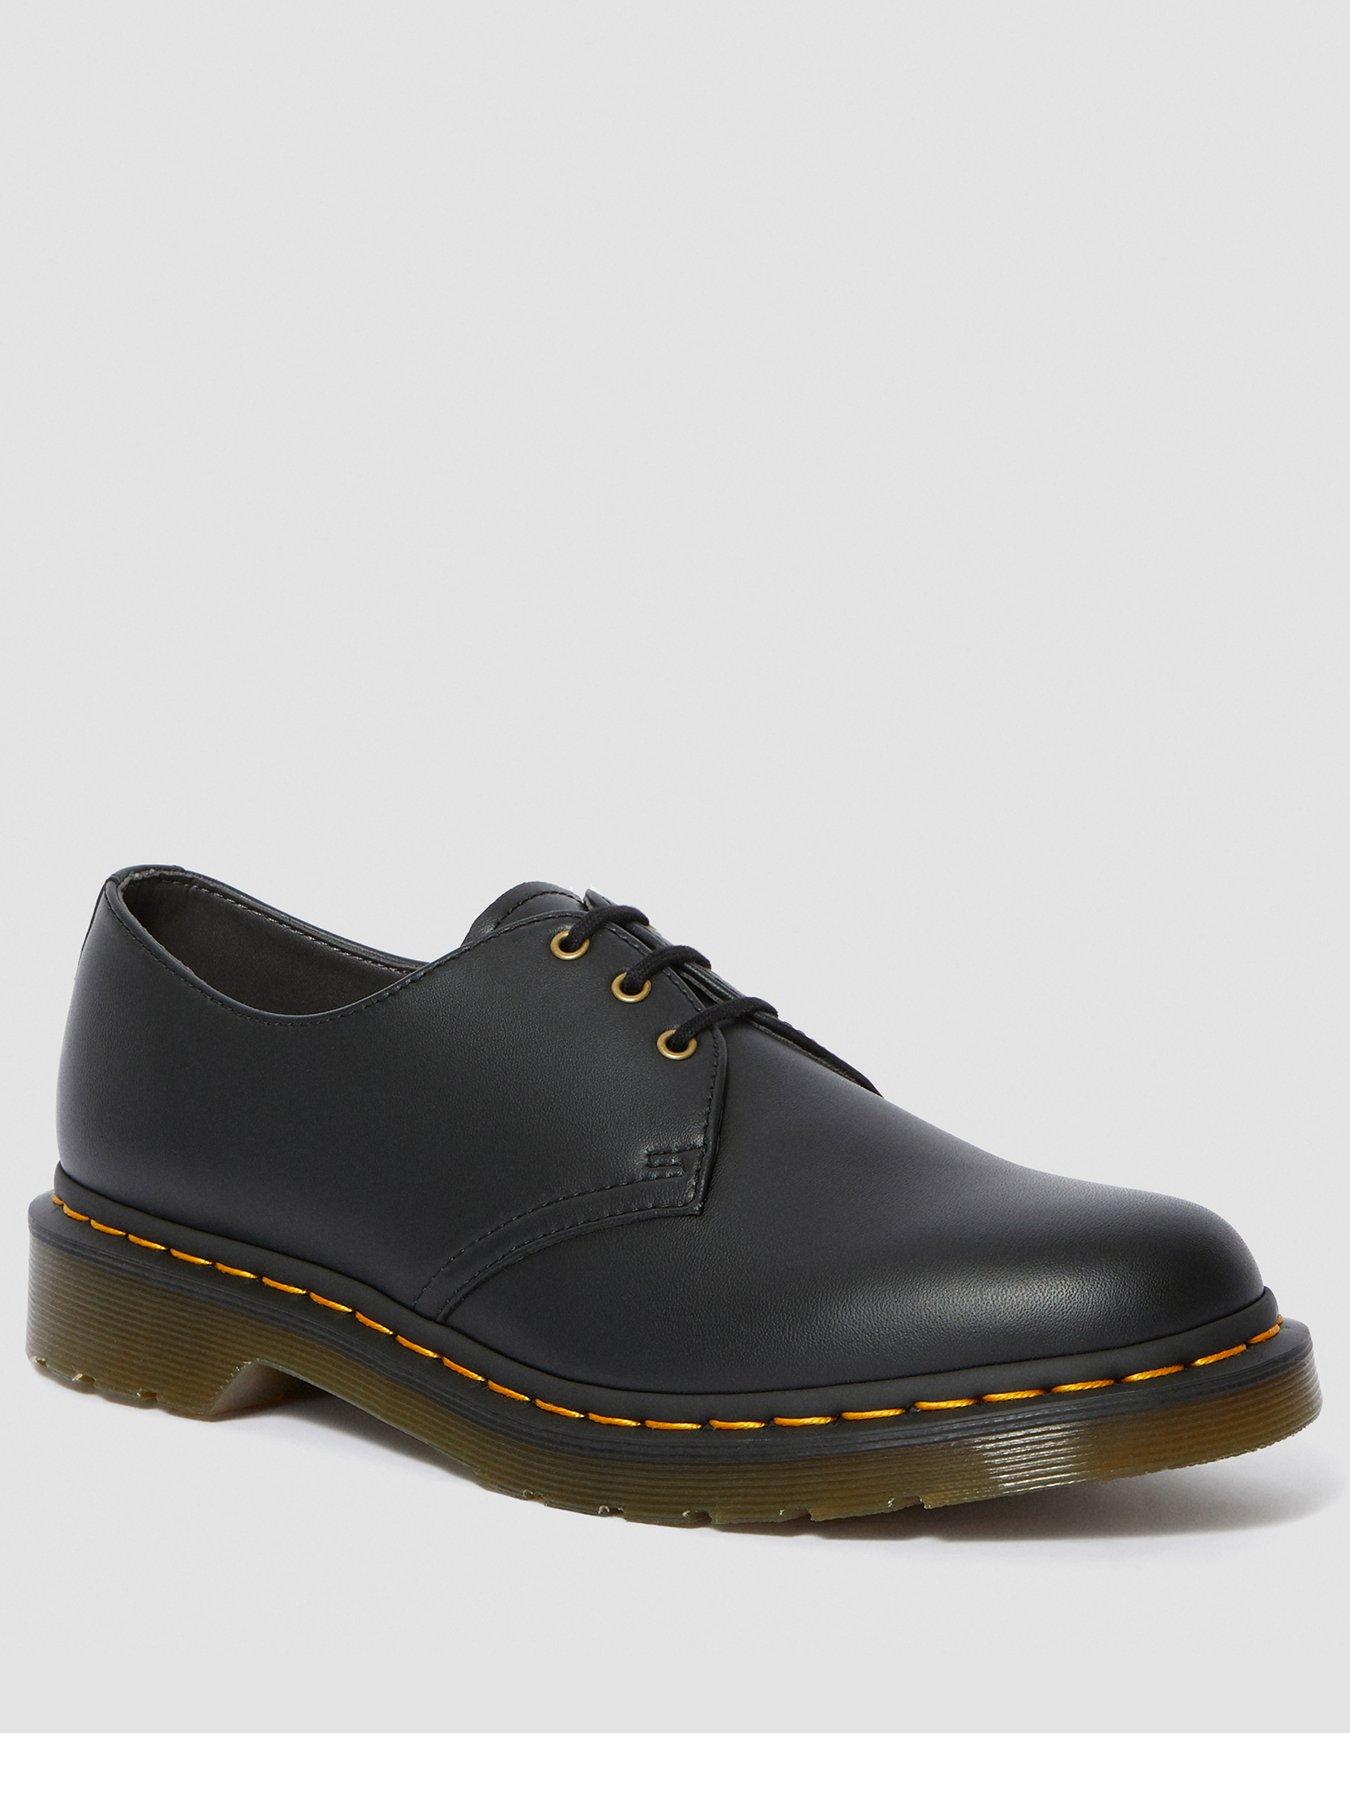 Dr Martens Womens Shoes | Very.co.uk